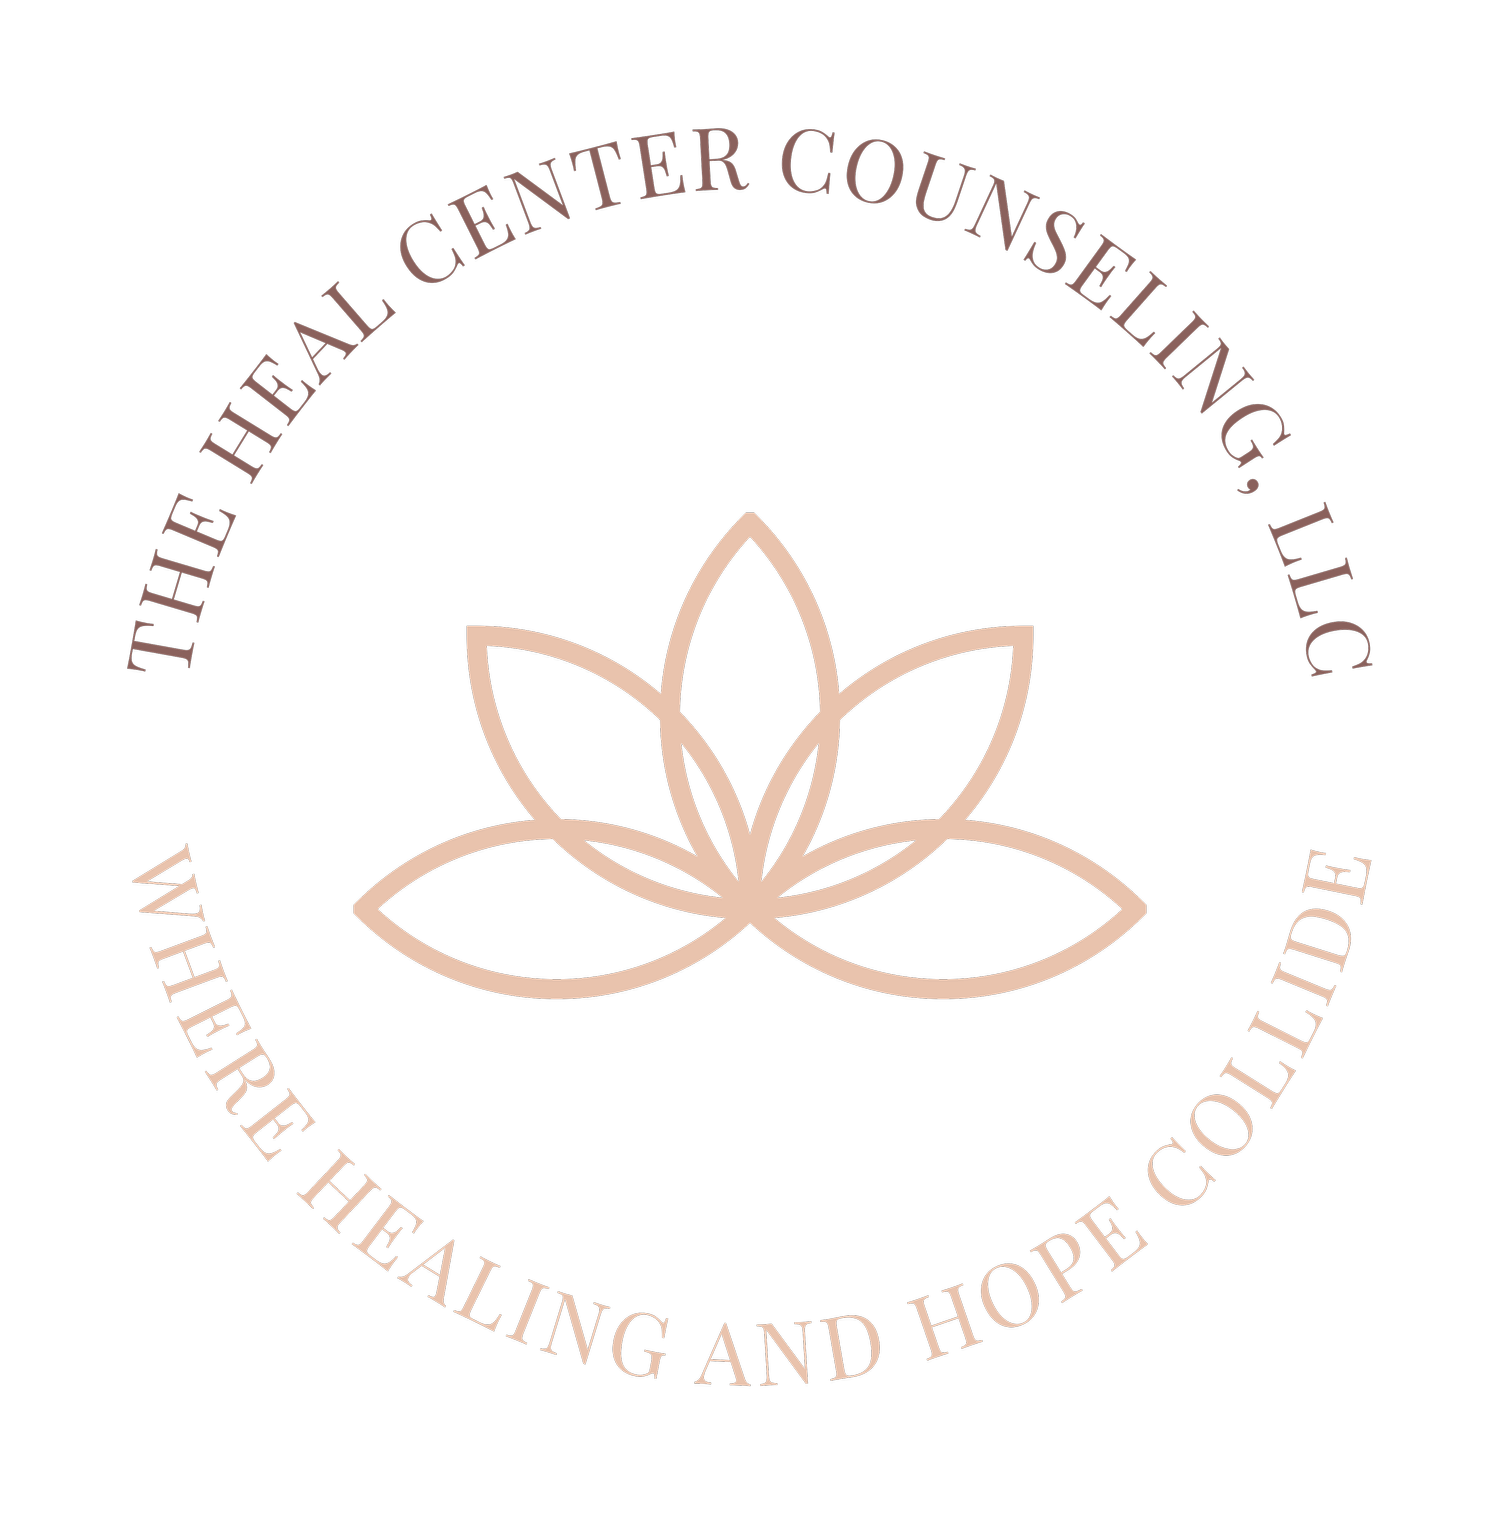 The Heal Center Counseling, LLC